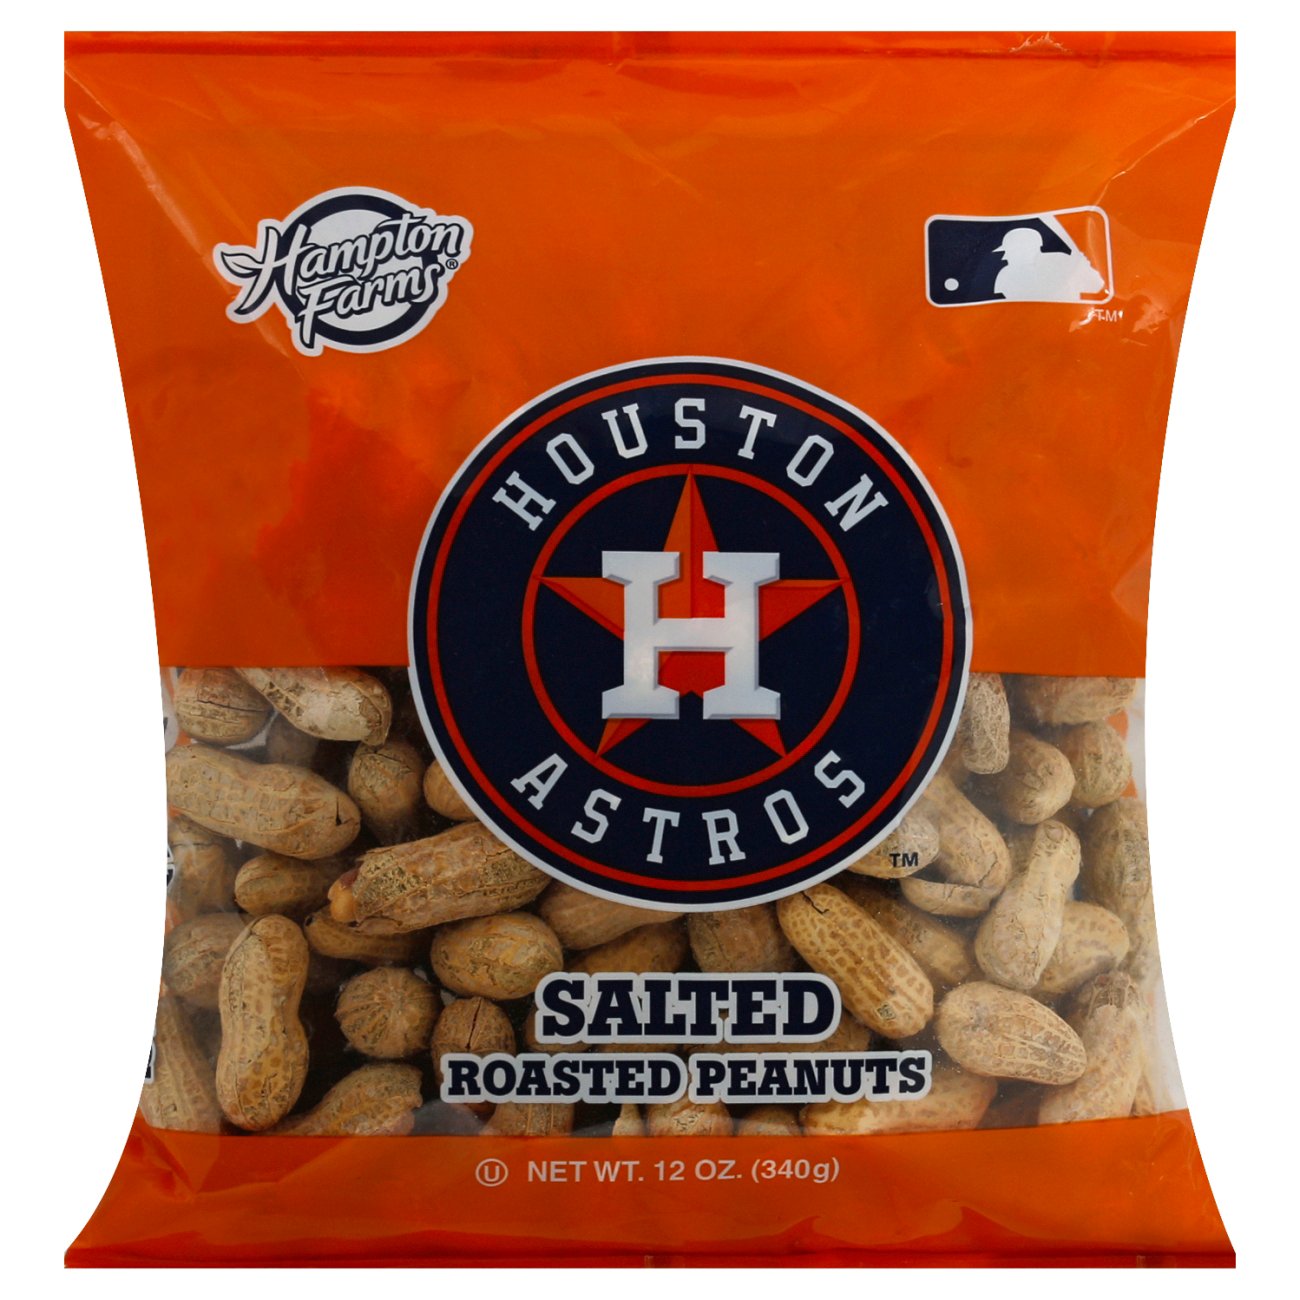 H-E-B and the Houston Astros